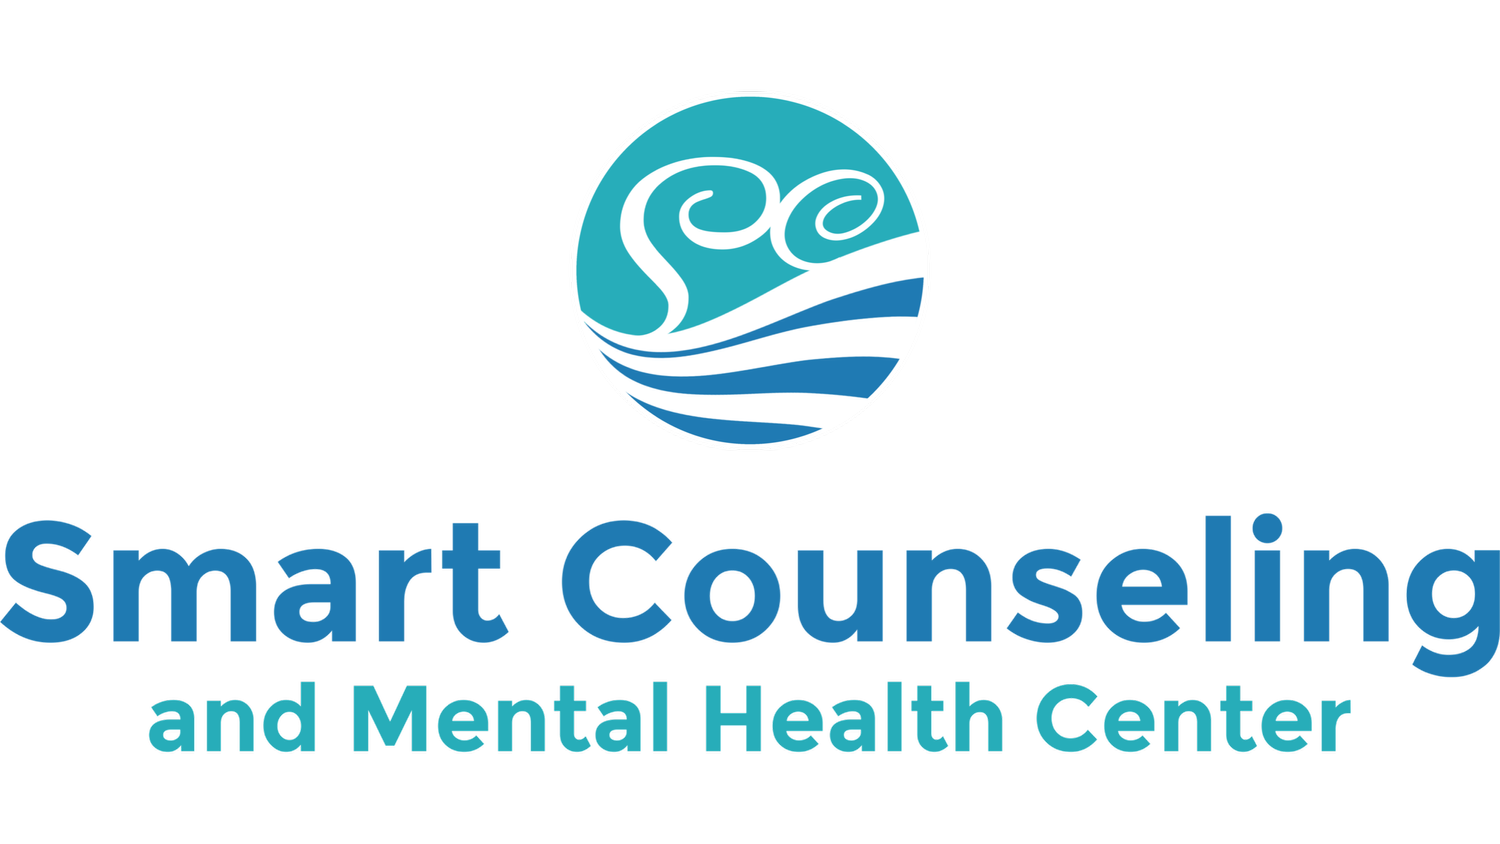 Smart Counseling and Mental Health Center